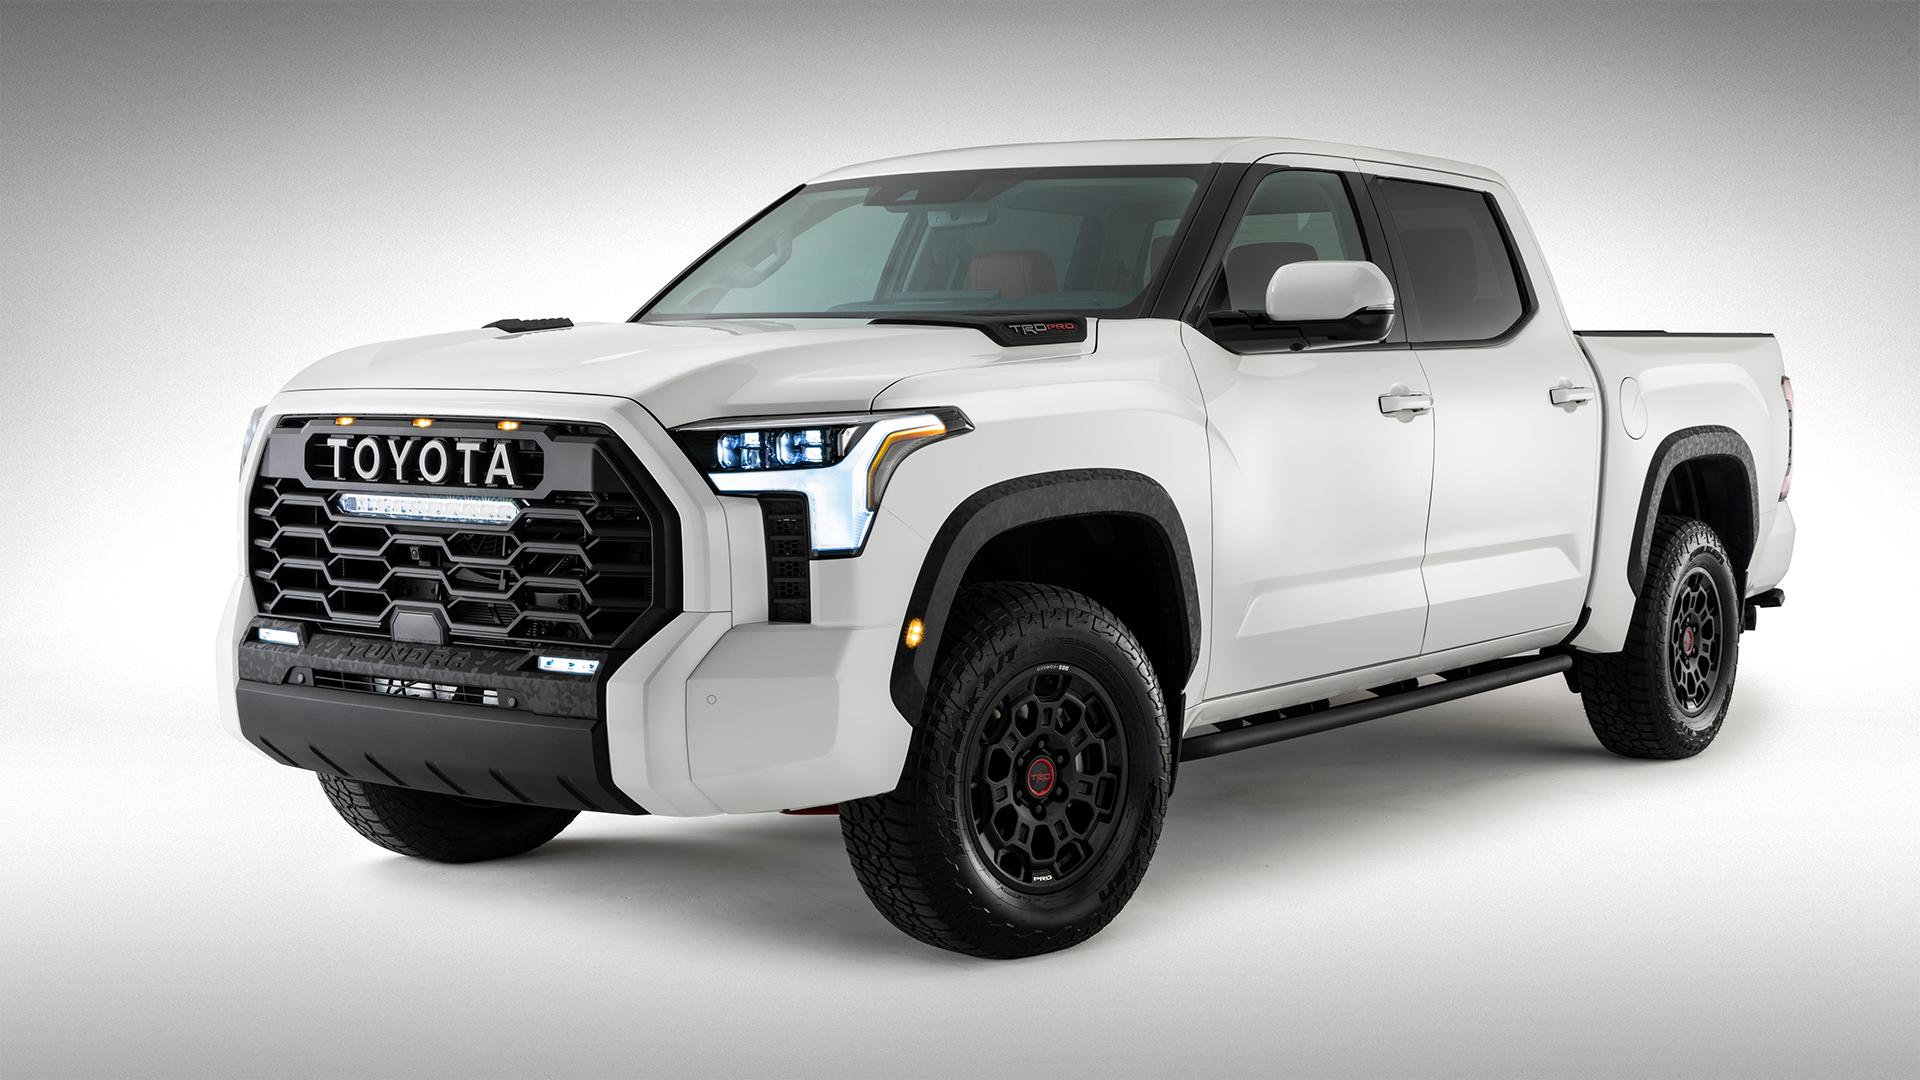 Toyota Reveals First Official Image of 2022 Tundra - PakWheels Blog